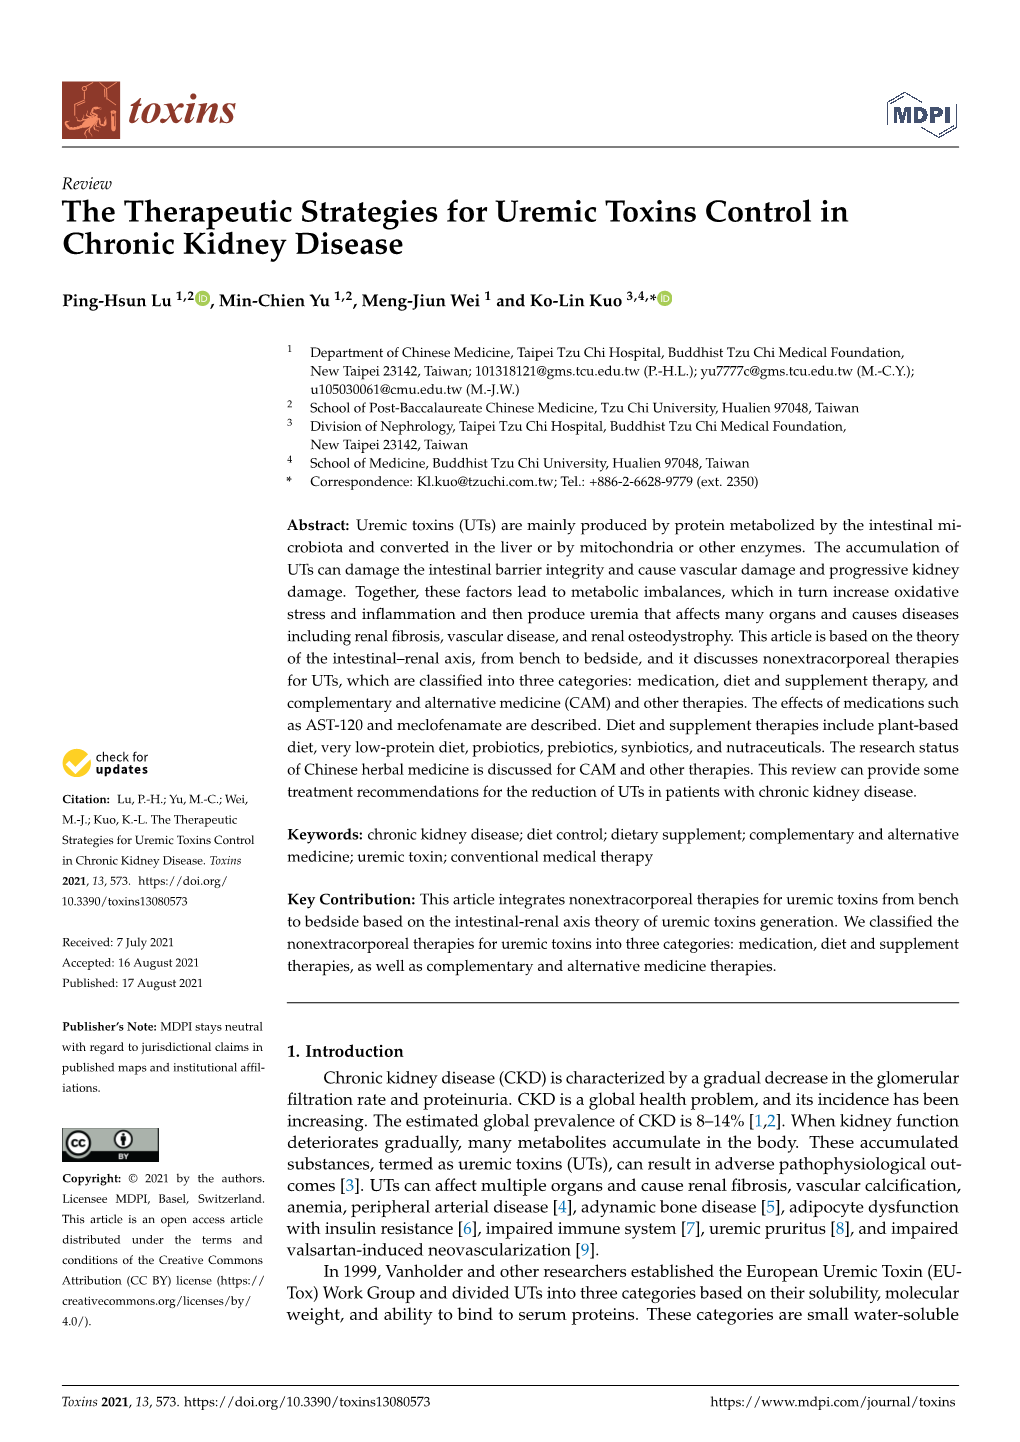 The Therapeutic Strategies for Uremic Toxins Control in Chronic Kidney Disease